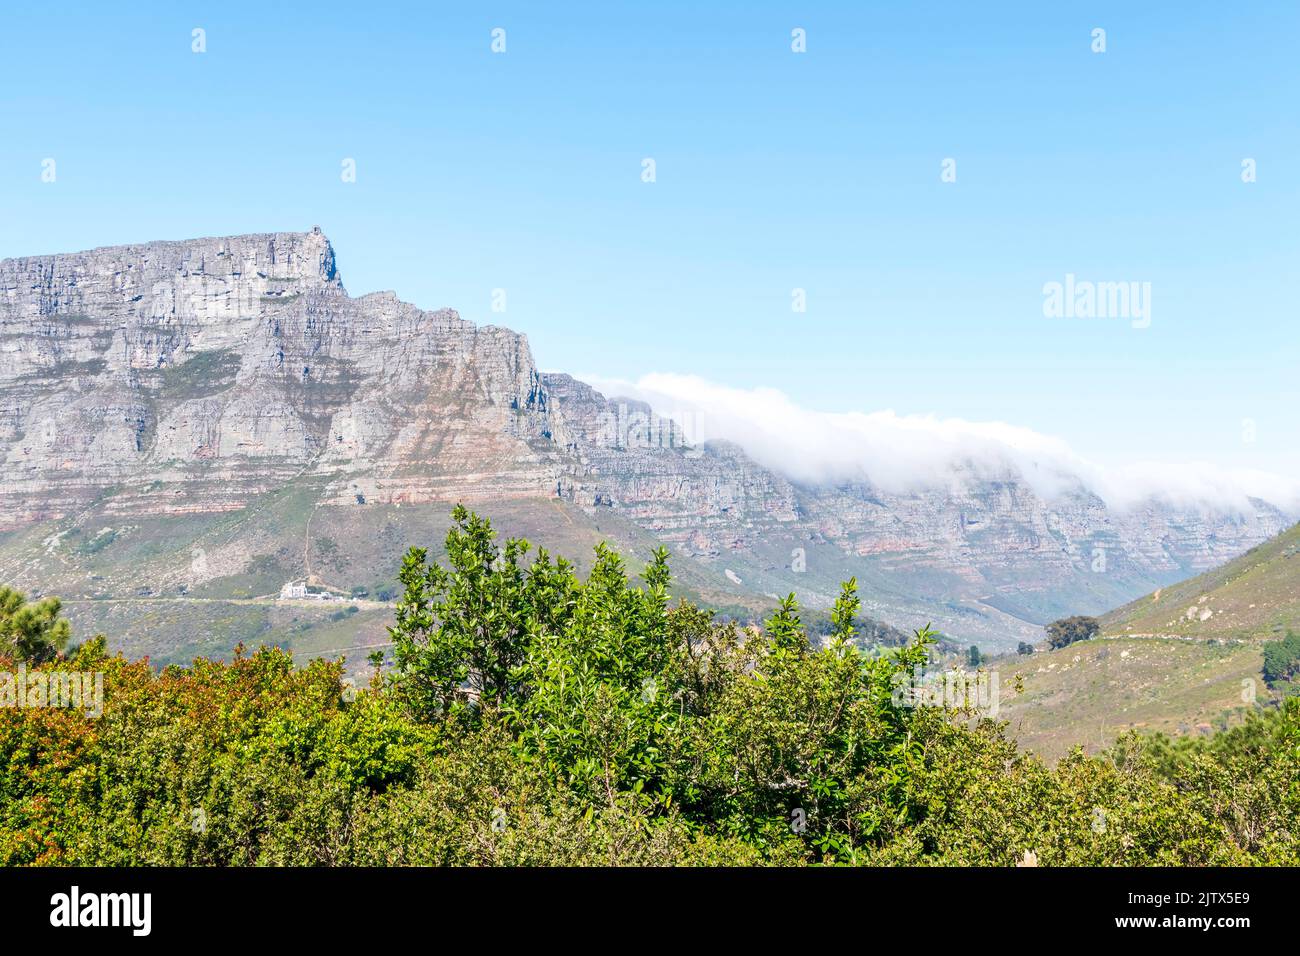 View of the table mountain in Cape Town through the trees. South Africa Stock Photo